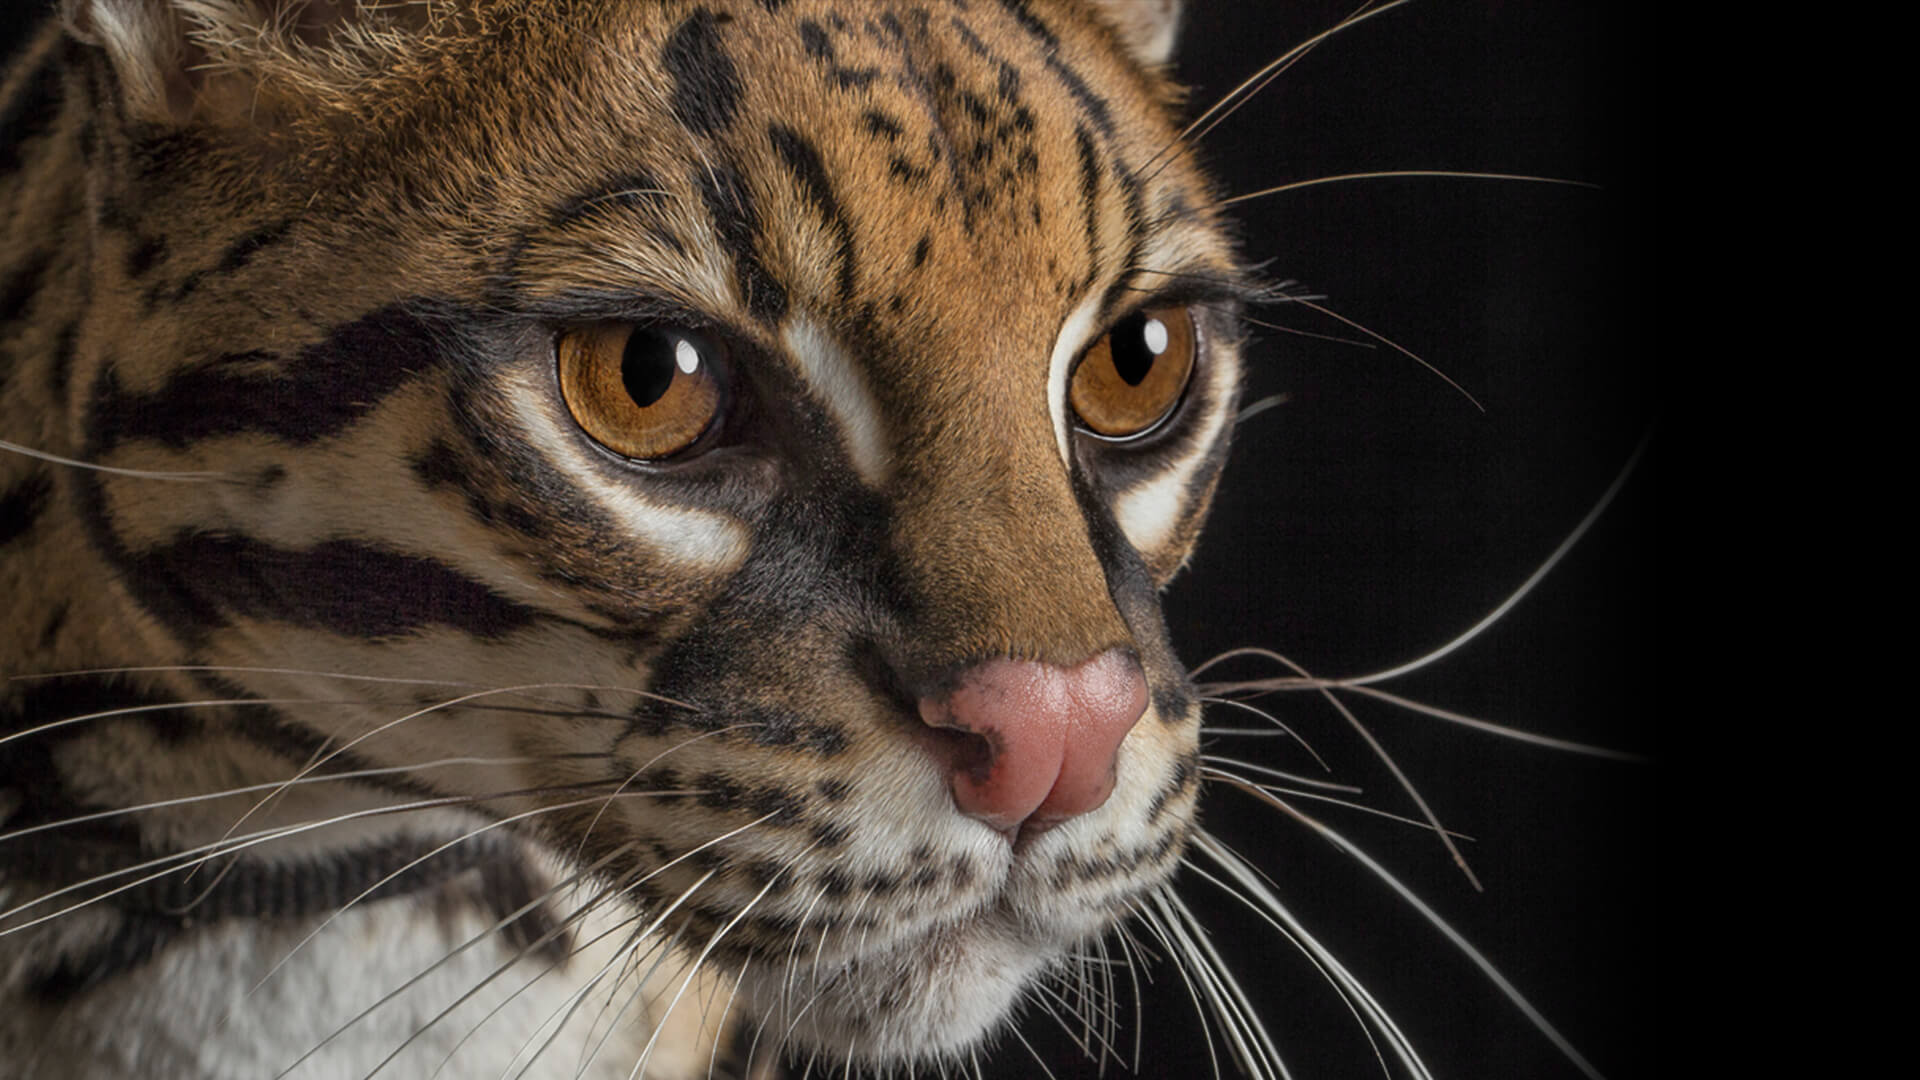 What color eyes do ocelots have?